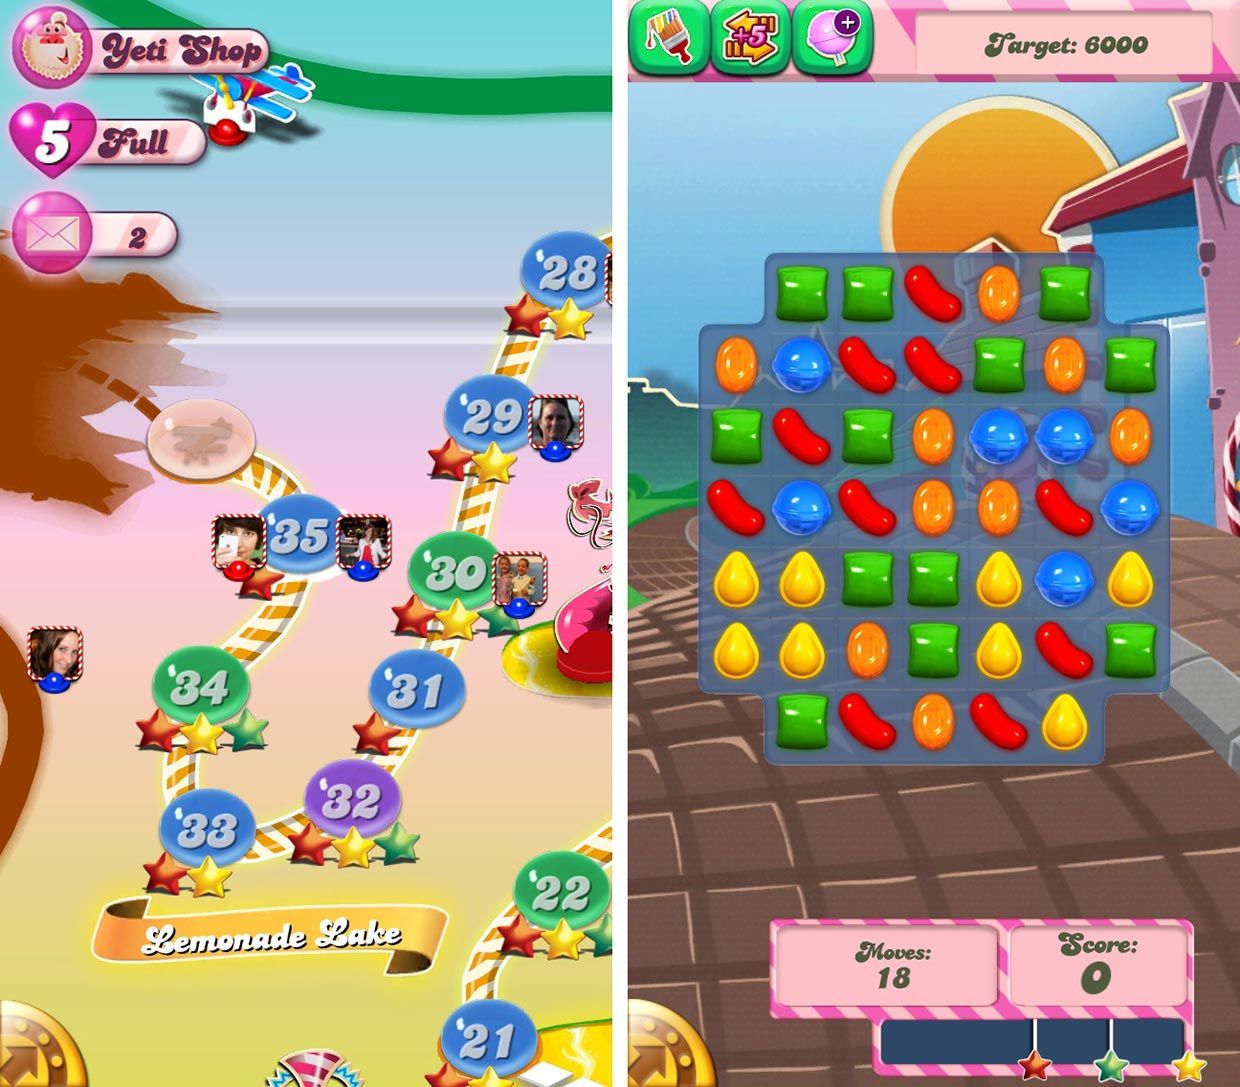 http://www.imore.com/candy-crush-saga-iphone-review